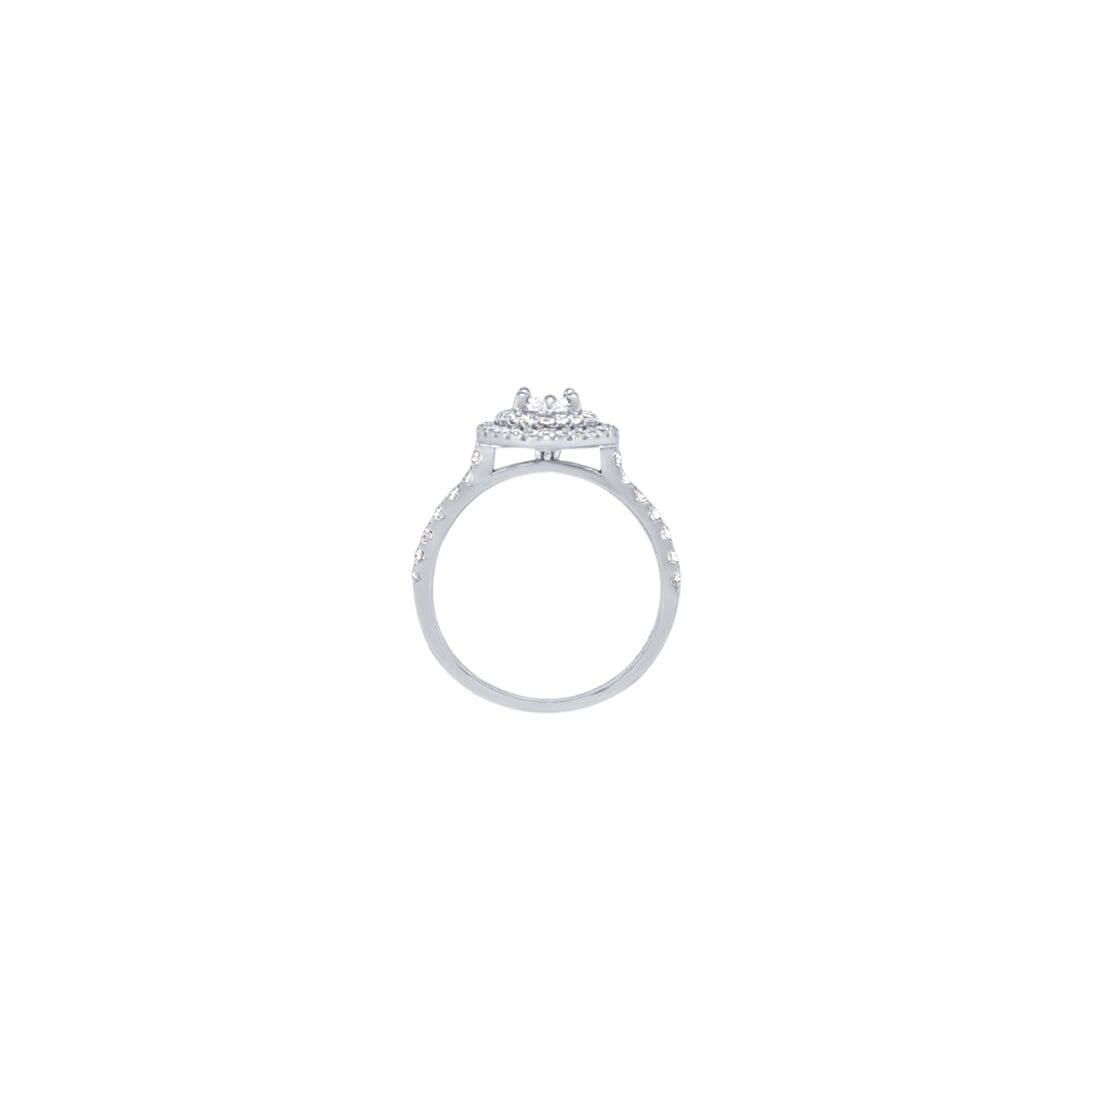 Pear Shaped Double Halo Ring with Cubic Zirconia in Sterling Silver Rings Bevilles 